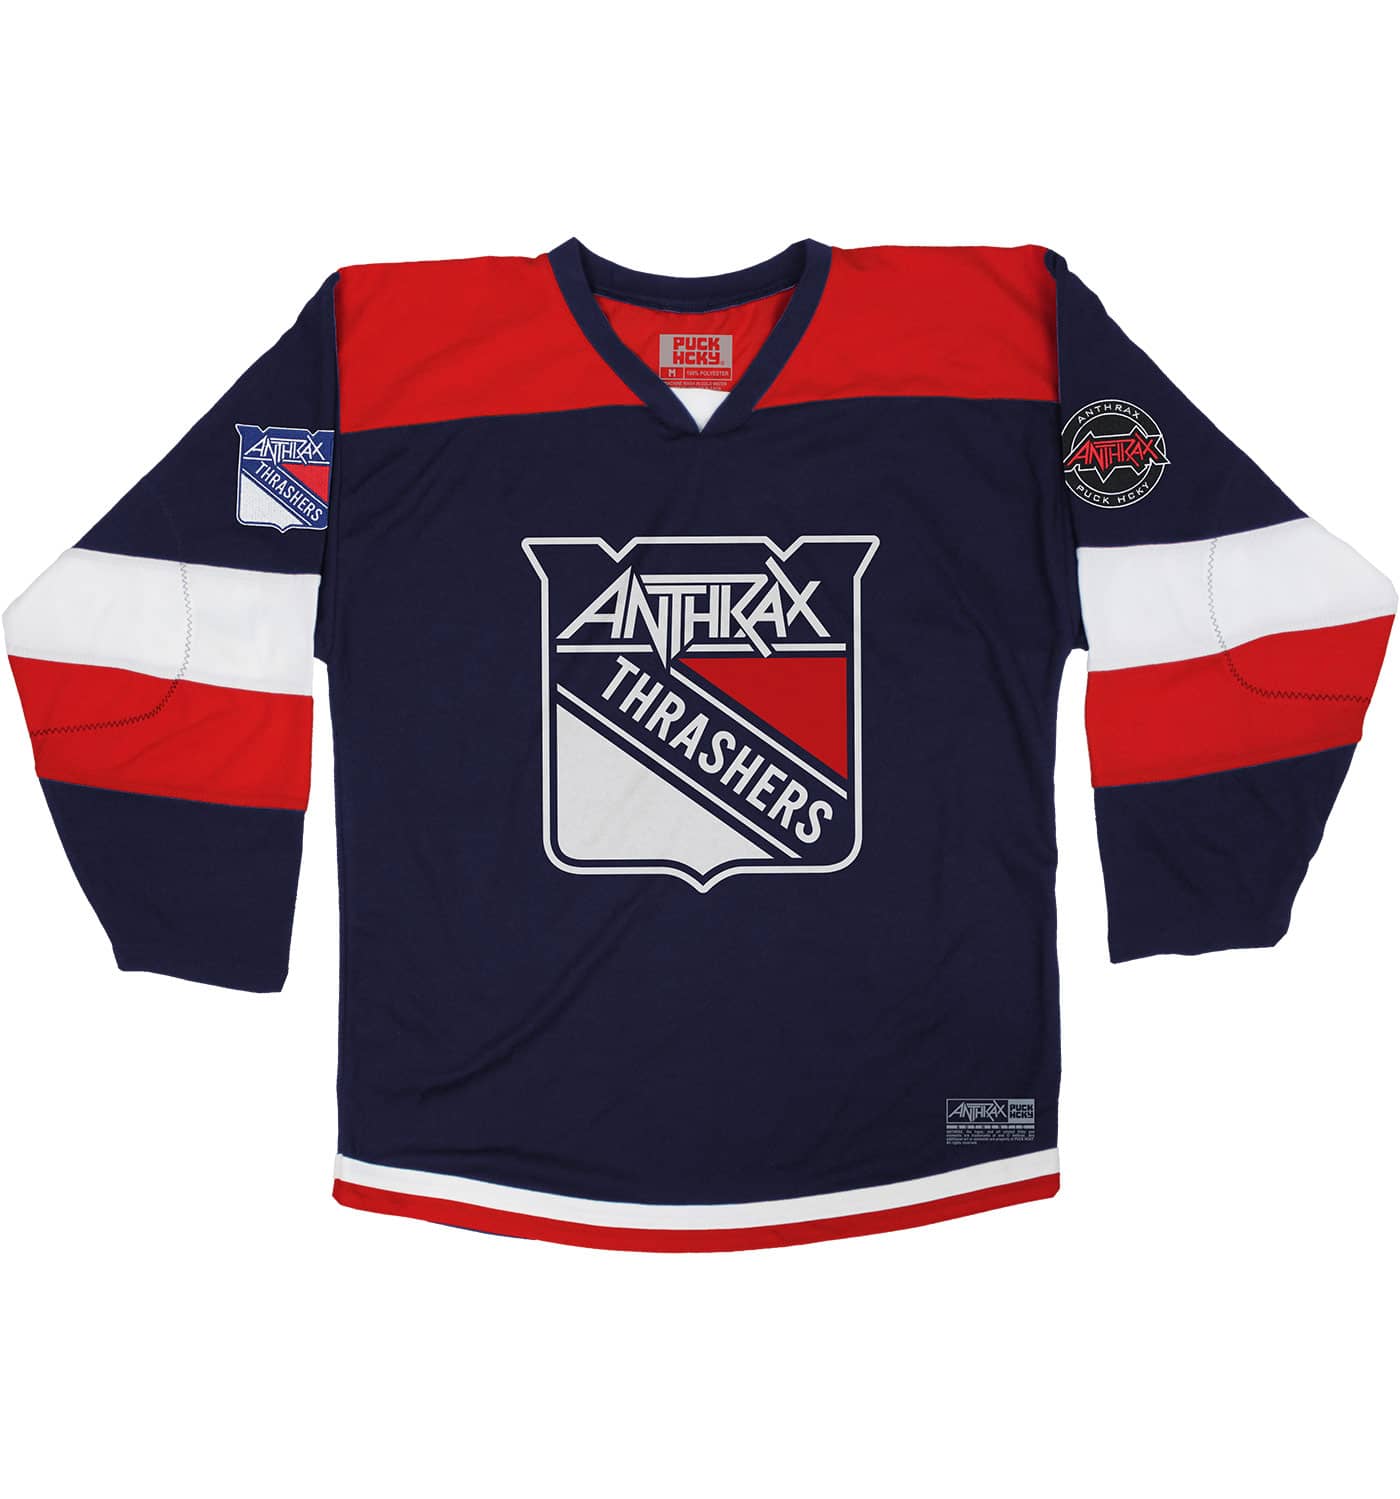 ANTHRAX 'METAL THRASHING MAD' hockey jersey in navy, red, and white front view